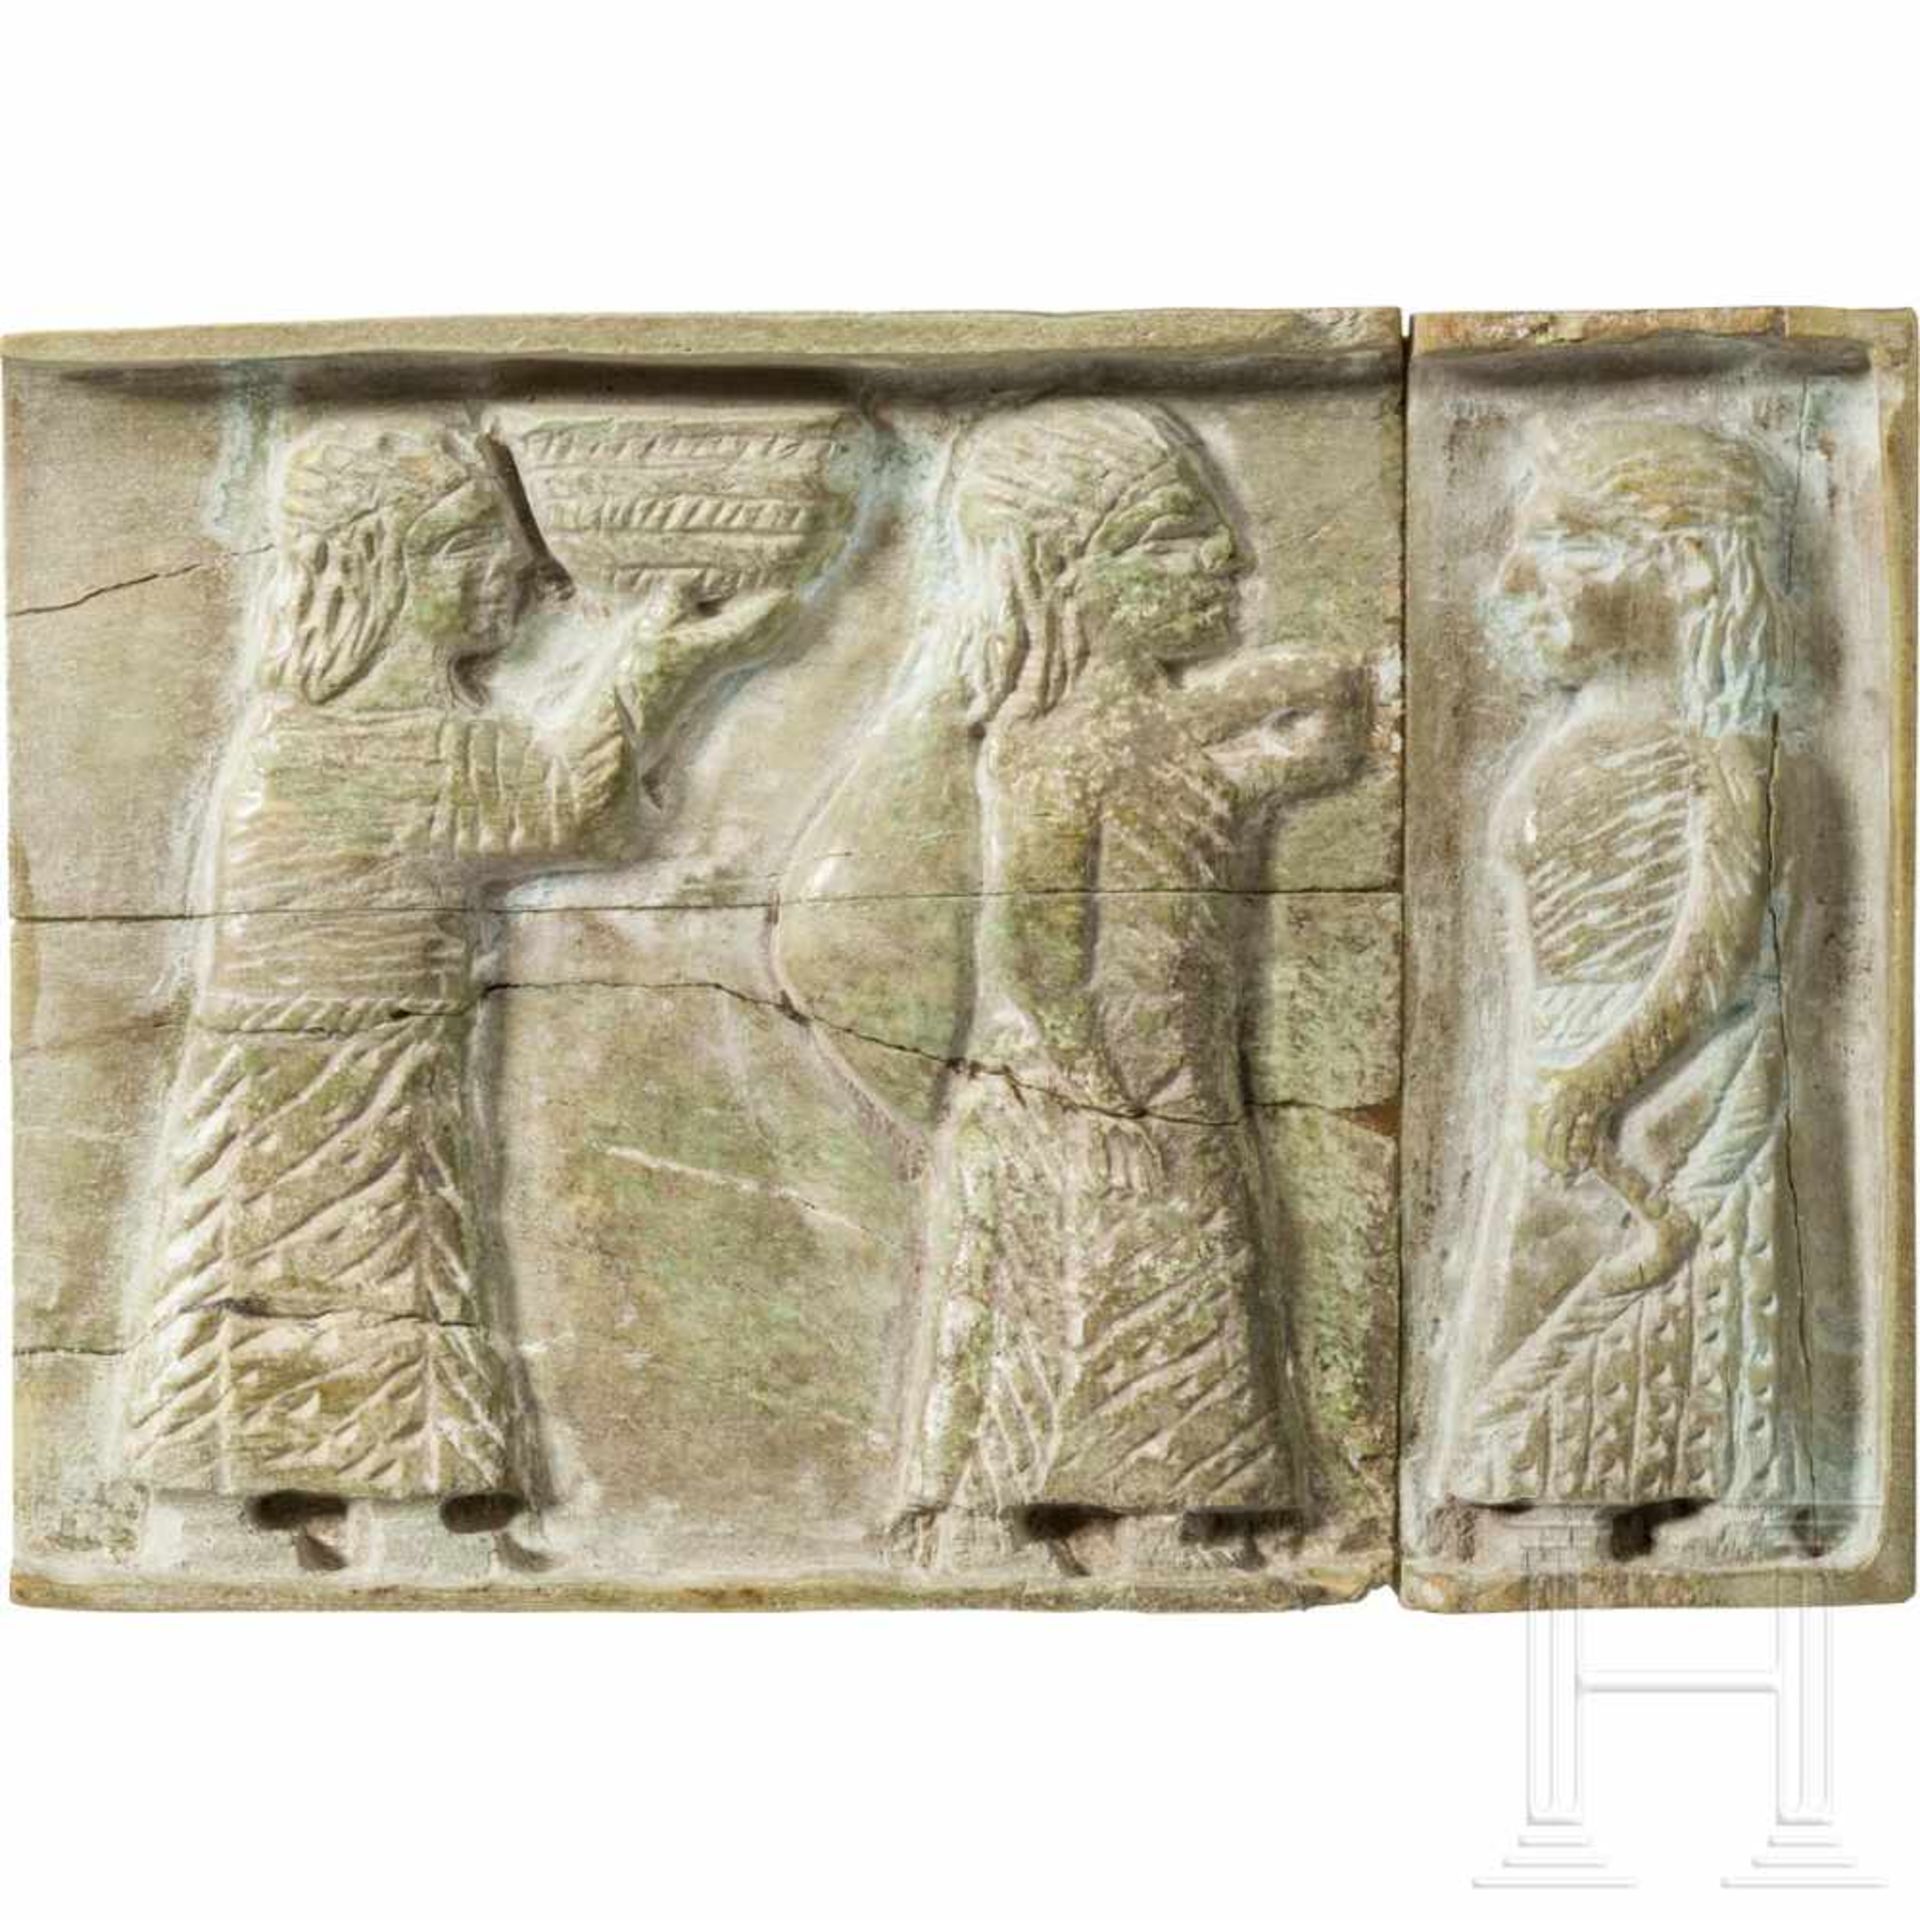 A western Asian relief plaque made of bone, 1st half of the 1st millenium B.C.Rectangular fragment